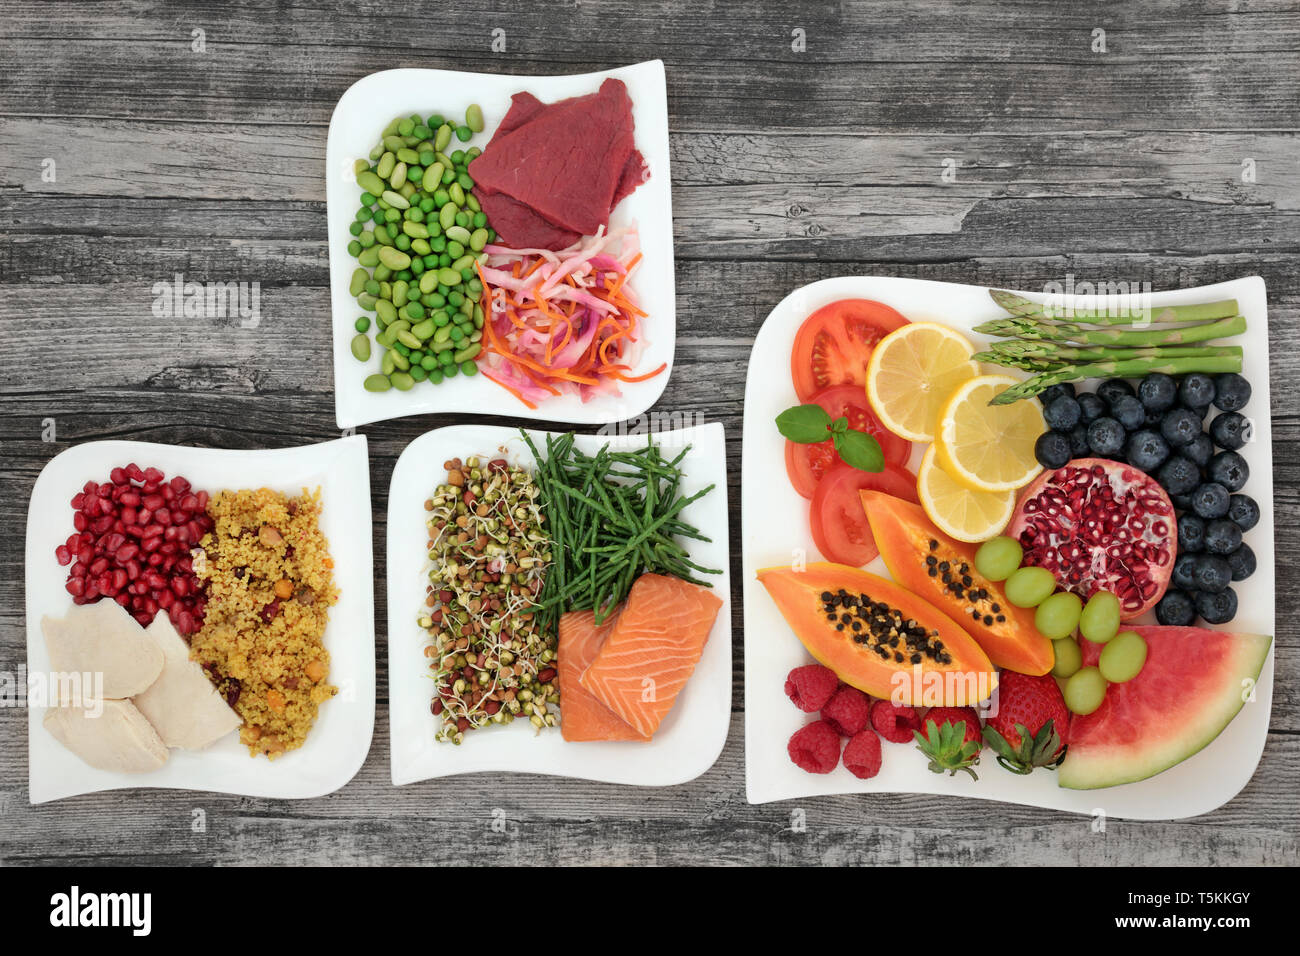 Diet health food for weight loss with fish, lean meat, fruit, vegetables  and salads with foods high in anthocyanins, antioxidants, vitamins & fibre  Stock Photo - Alamy